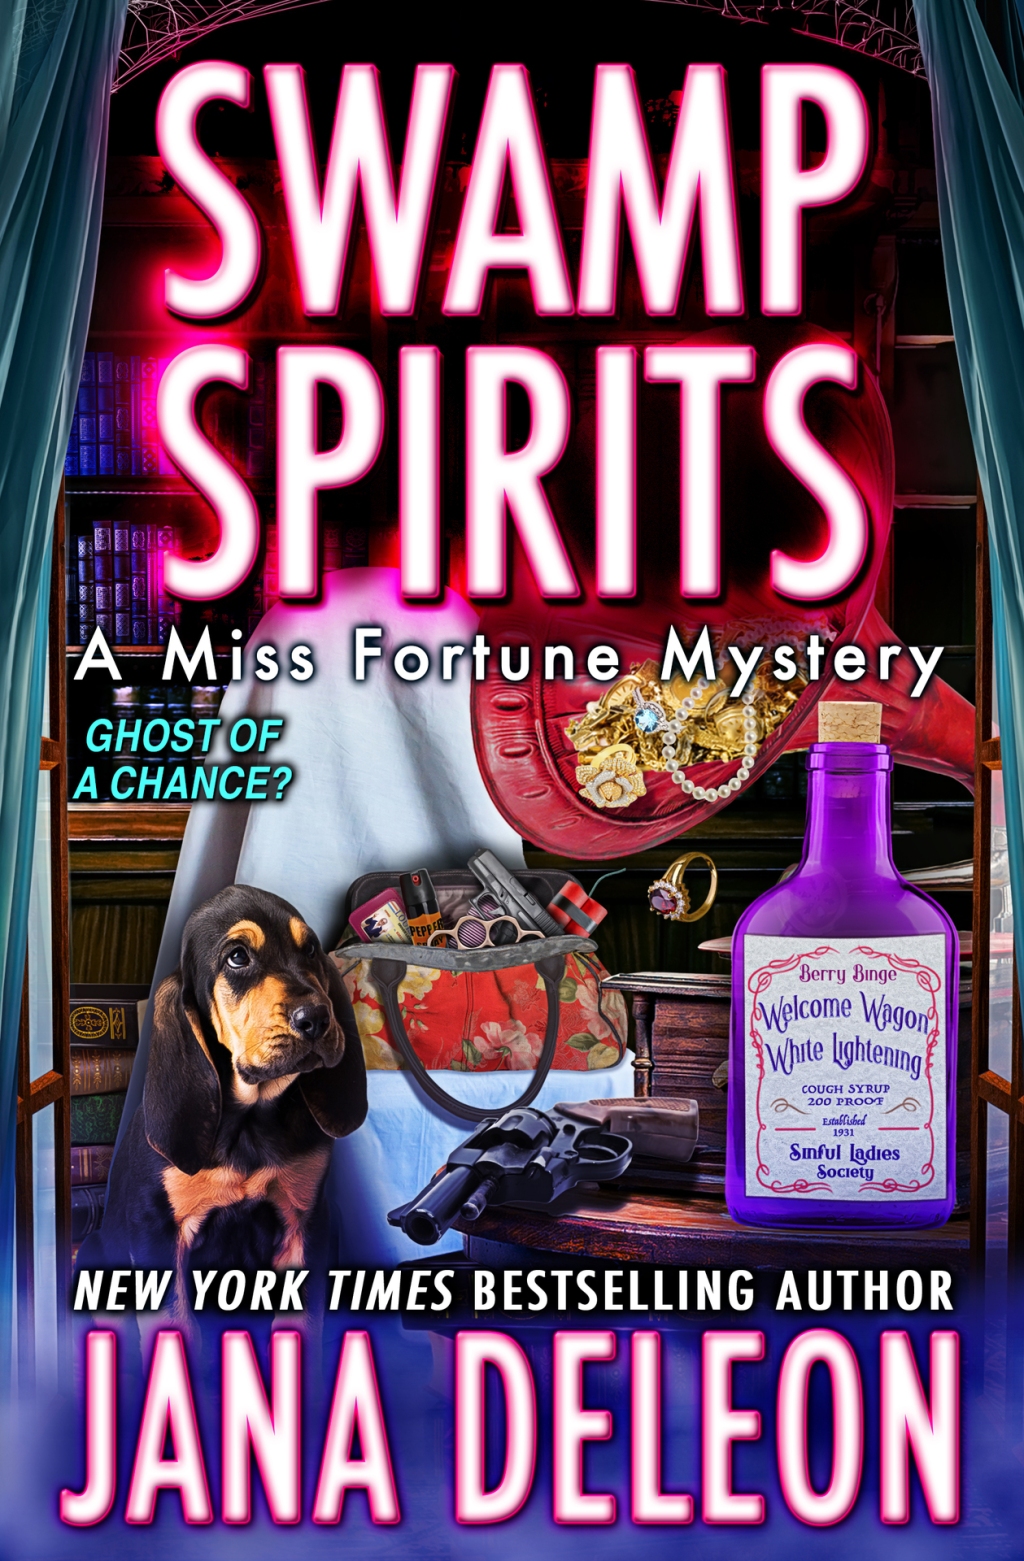 Swamp Spirits – Another good one in the series.